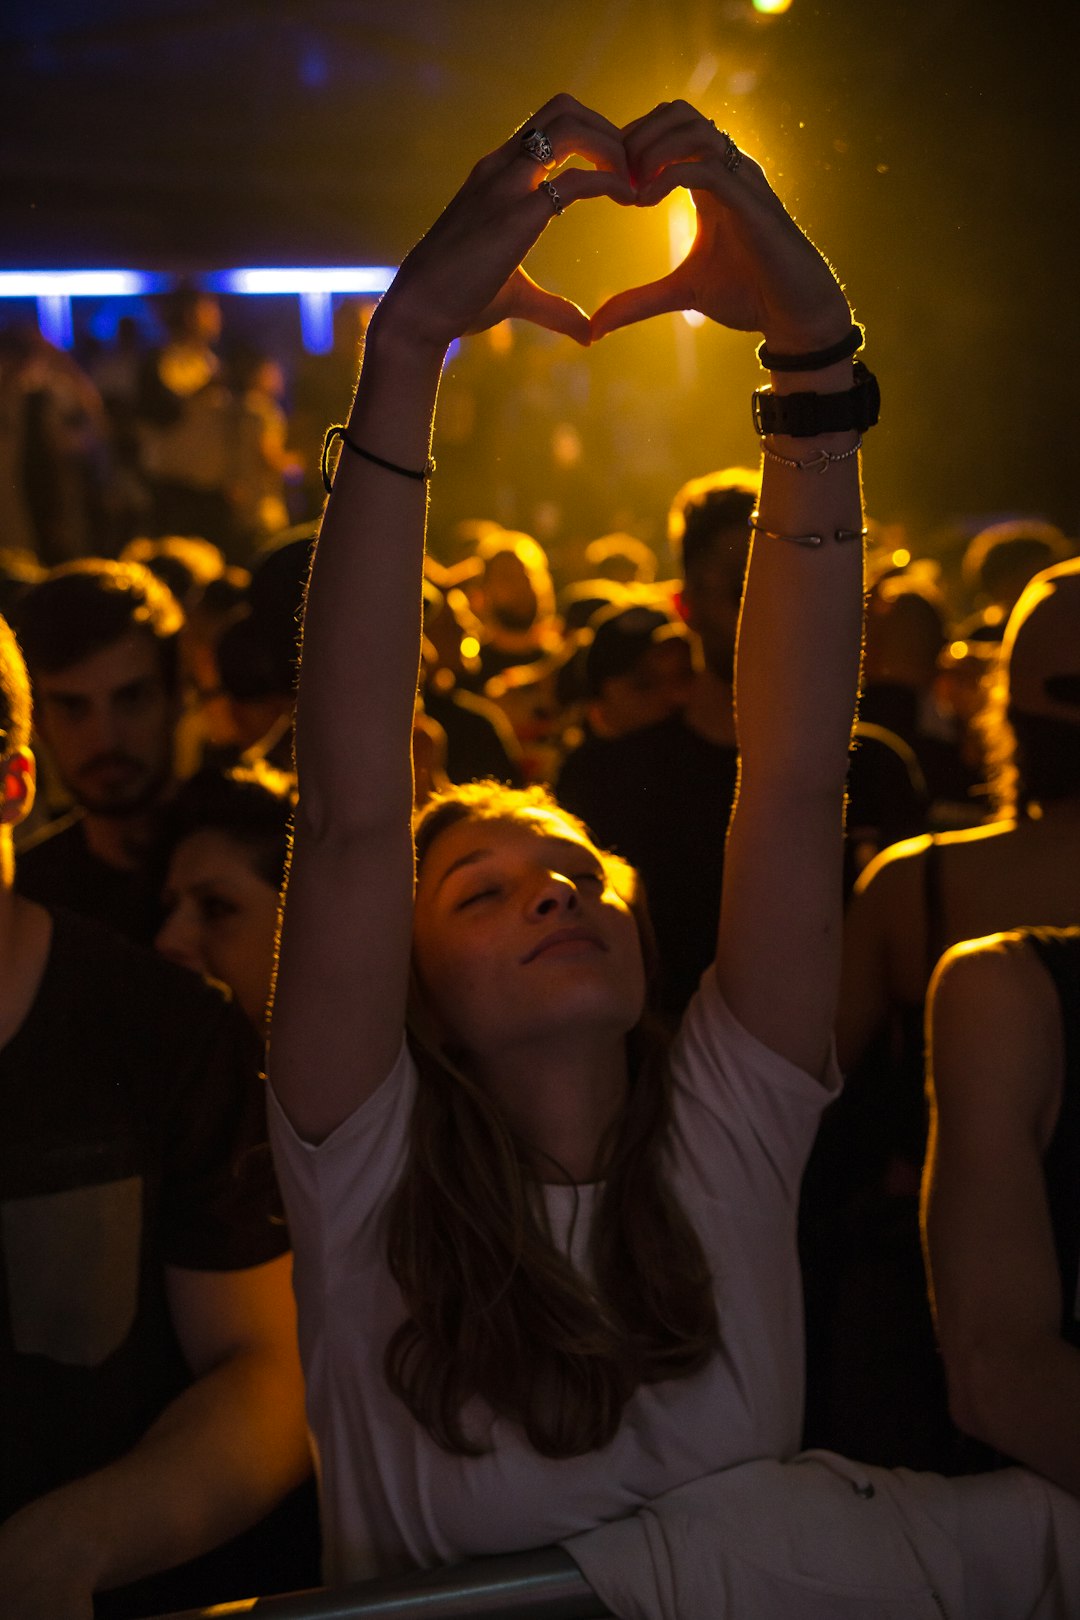  woman at crowd raising her hand while making heart sign fan